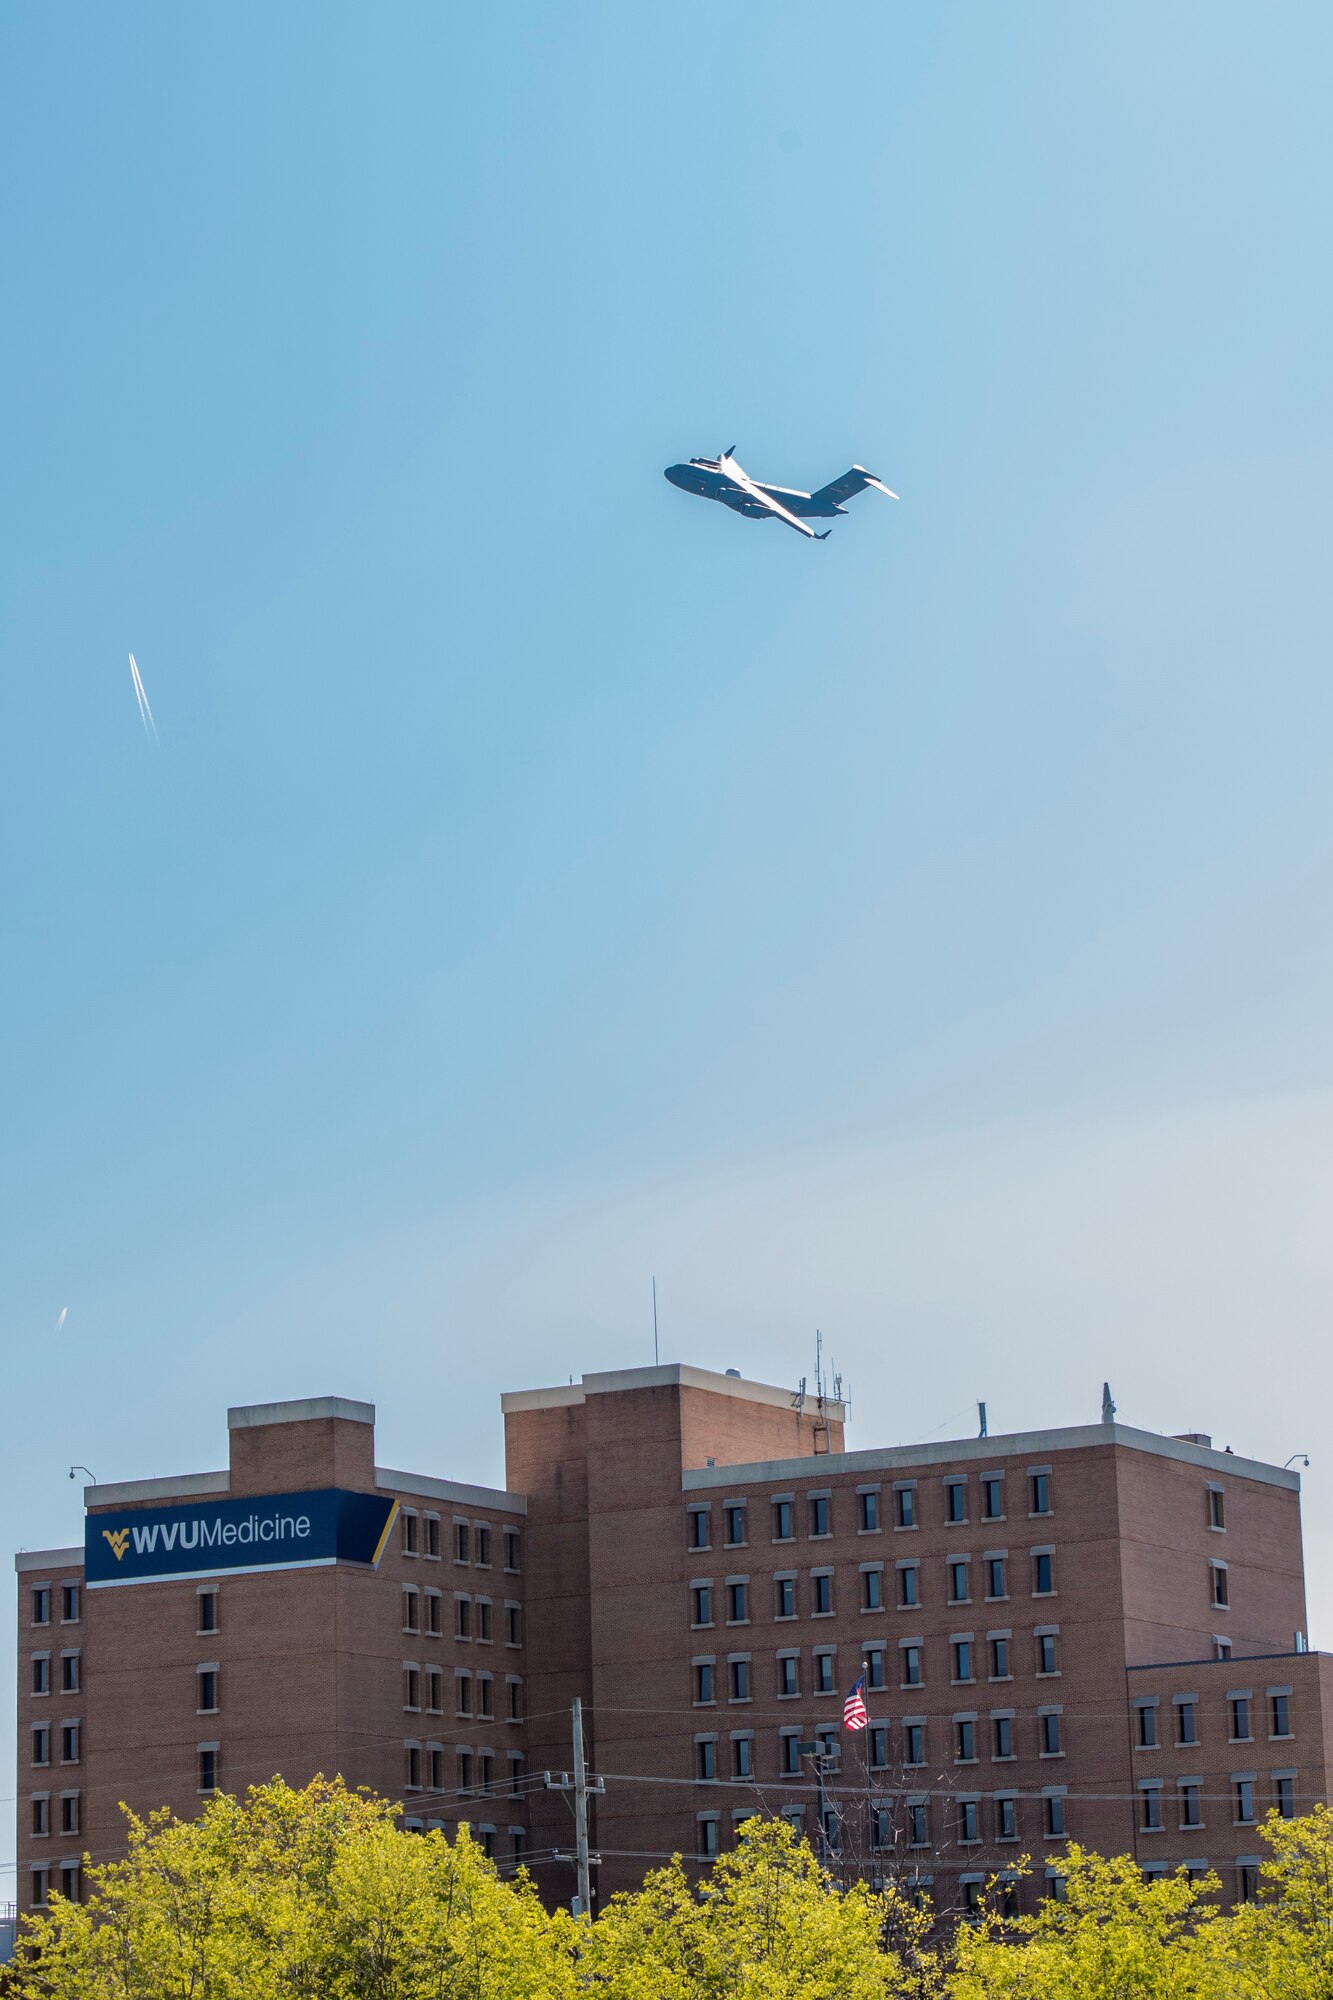 A 167th Airlift Wing C-17 Globemaster III aircraft flies over Berkeley Medical Center in Martinsburg, W.Va., May 13, 2020,as part of Operation American Resolve, a nation-wide salute to those supporting the COVID-19 response efforts.